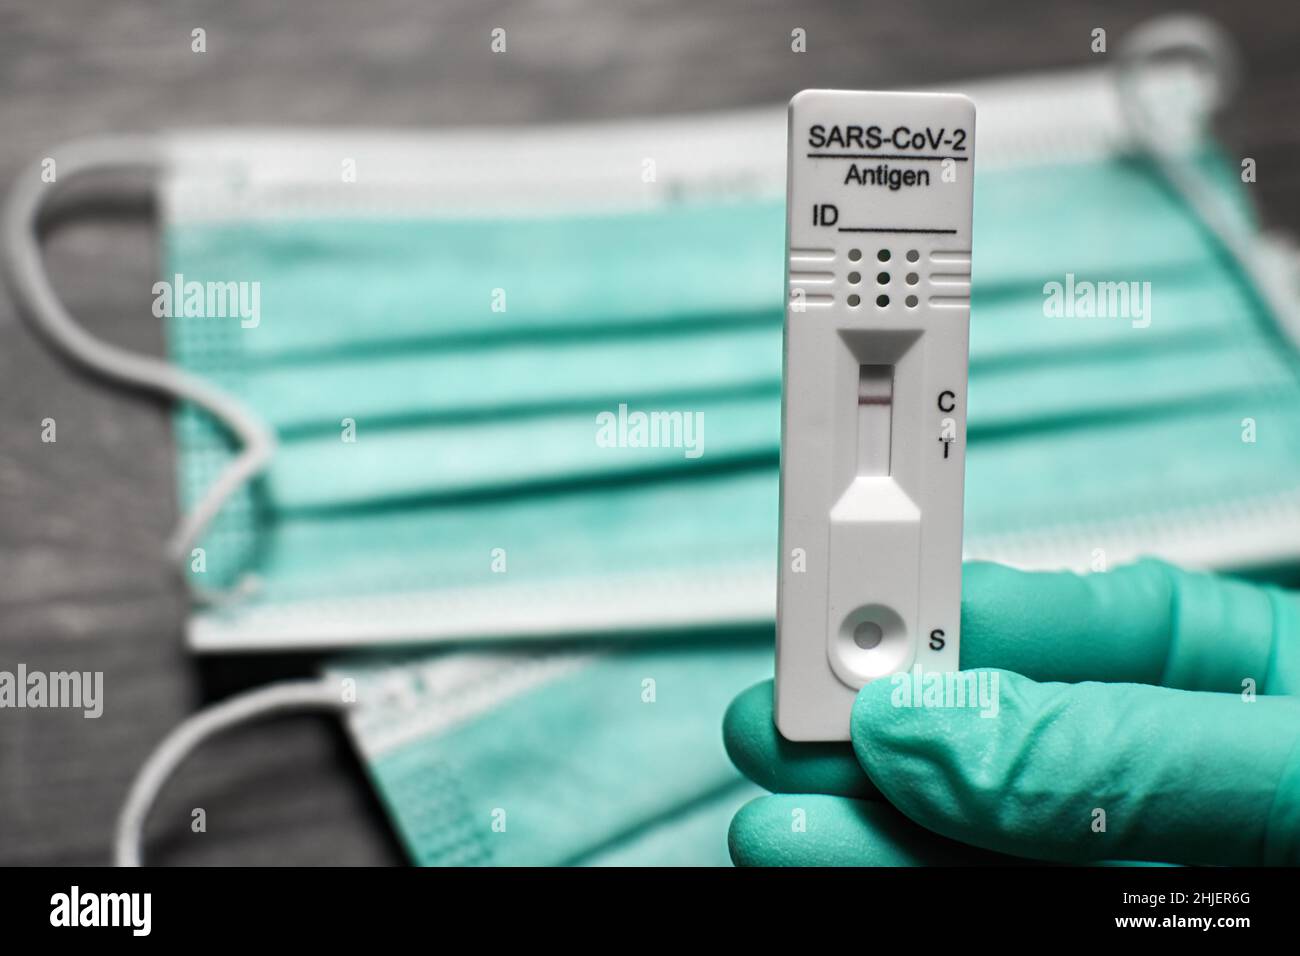 Hand with disposable glove holds coronavirus test kit with face masks in the background. Rapid antigen self-test shows negative result Stock Photo